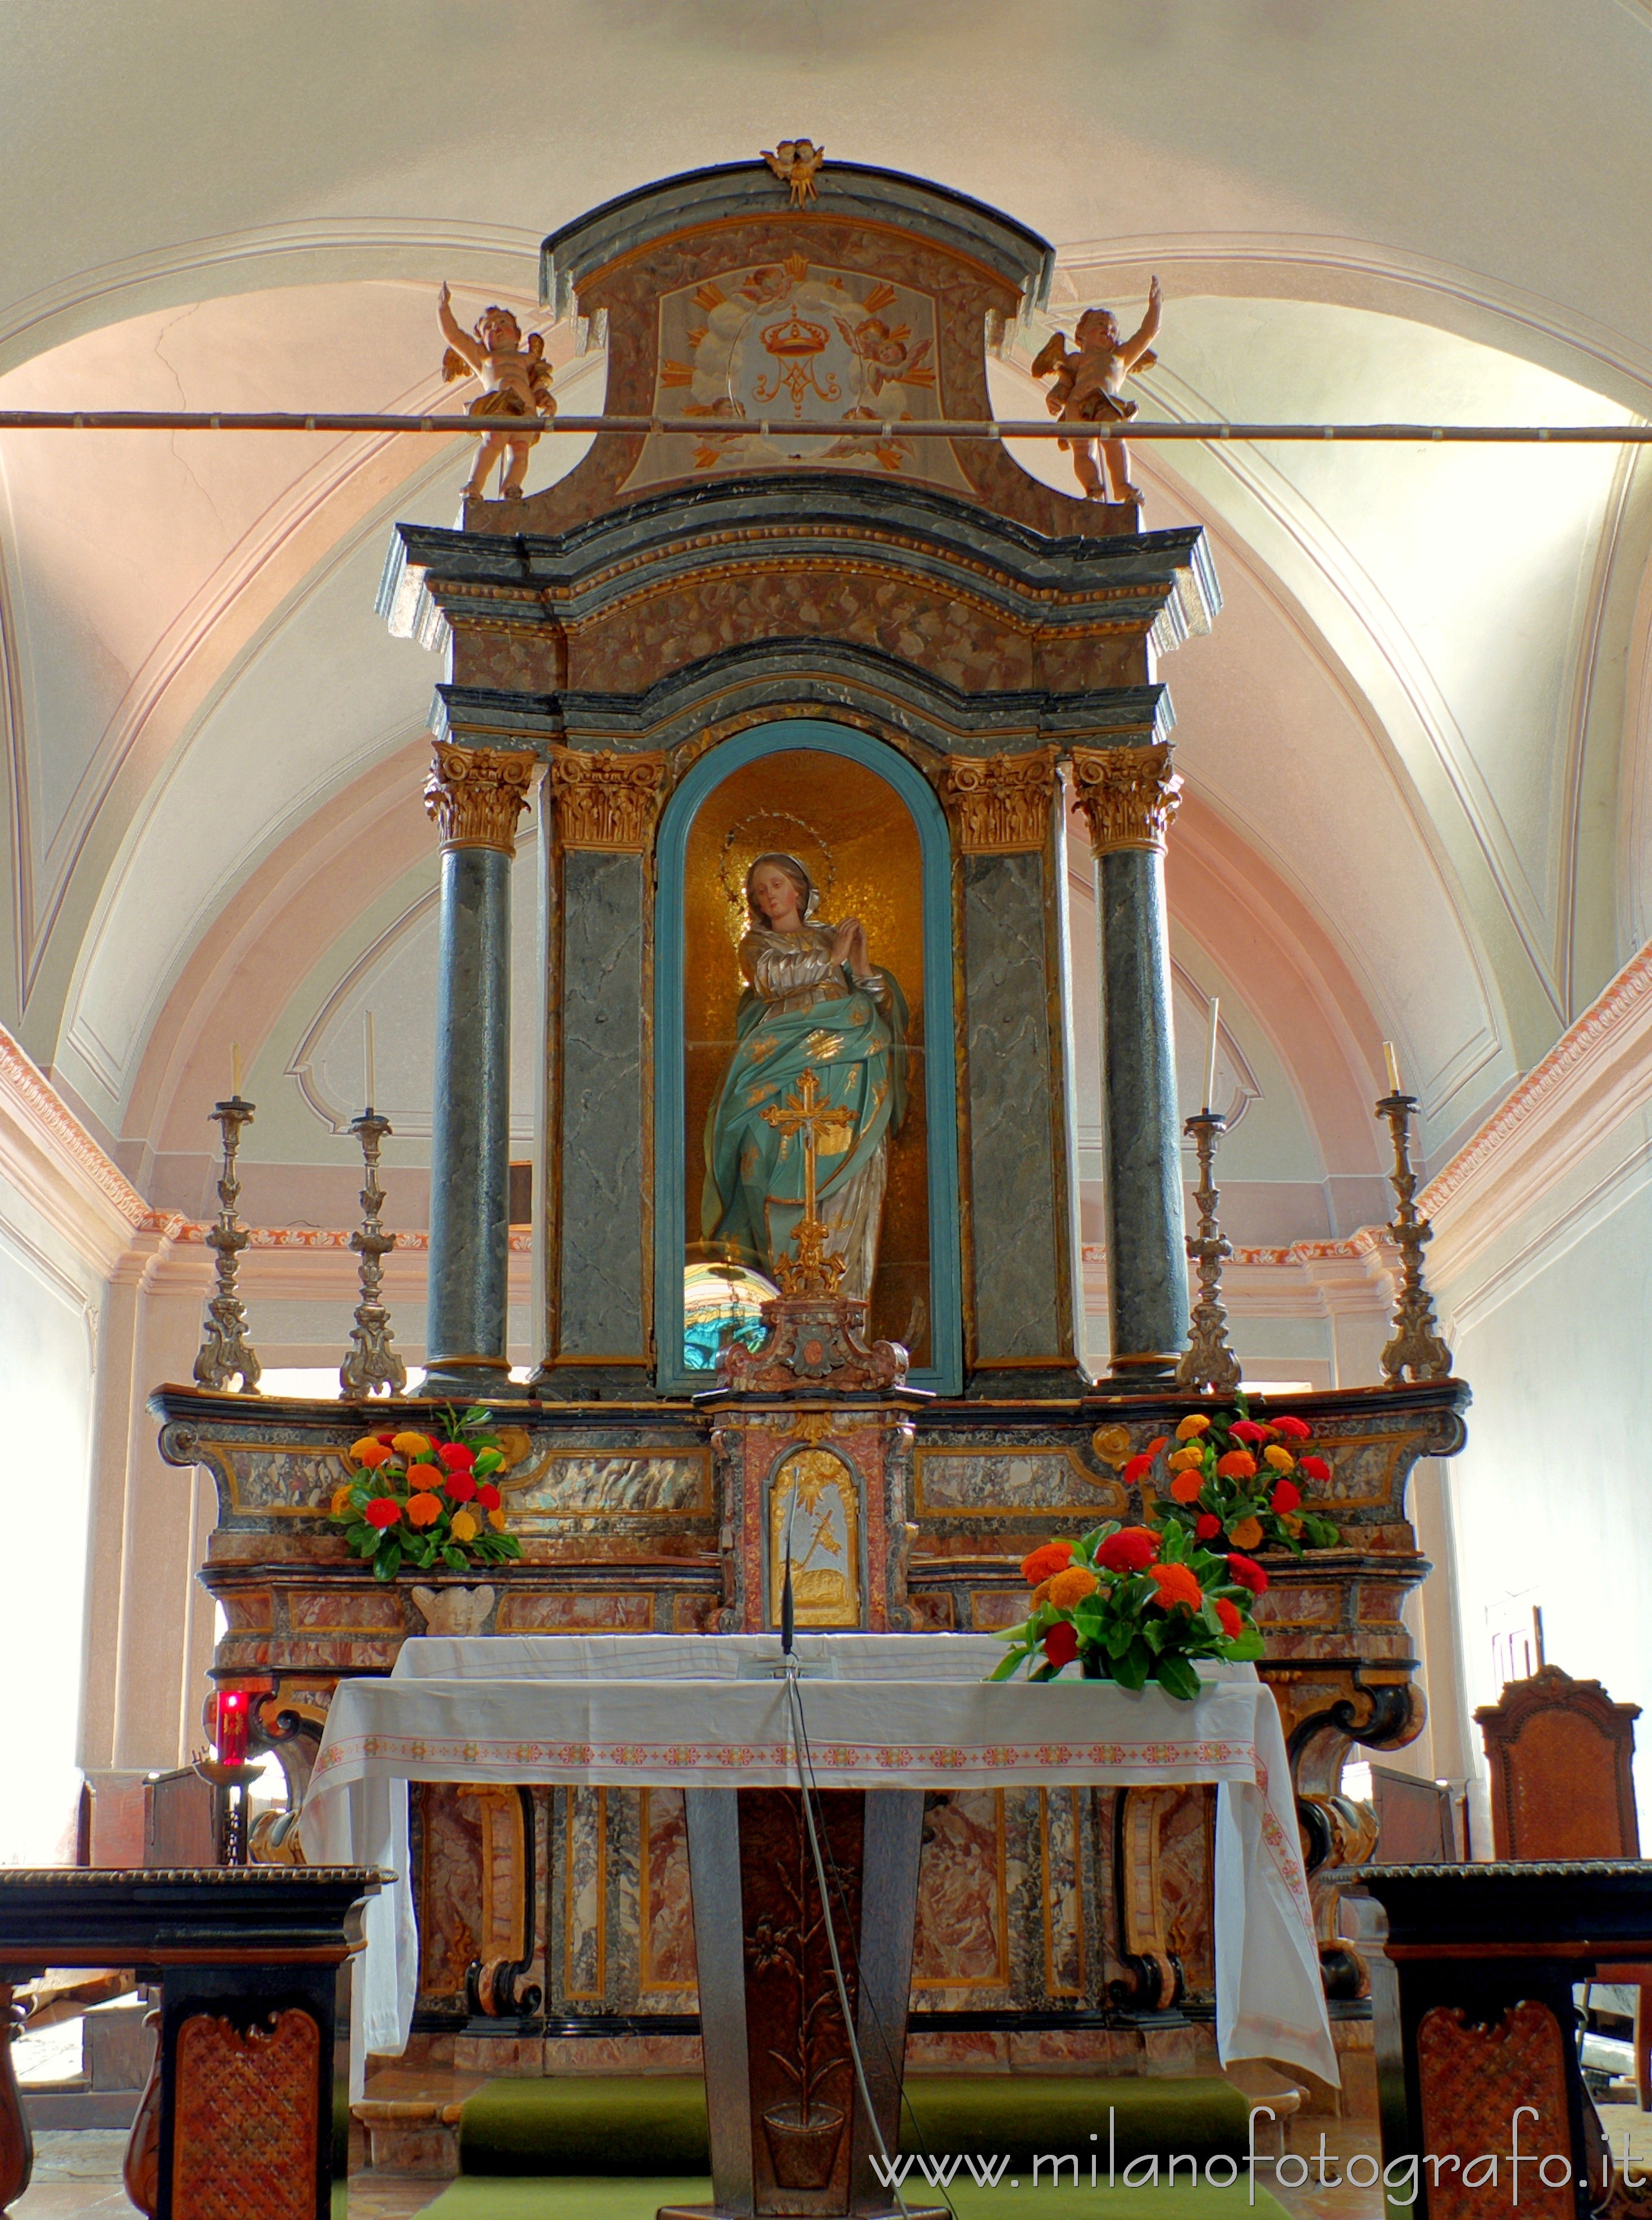 Piverone (Torino, Italy): Altar of the Chapel of the Brotherhood of the Disciplined - Piverone (Torino, Italy)